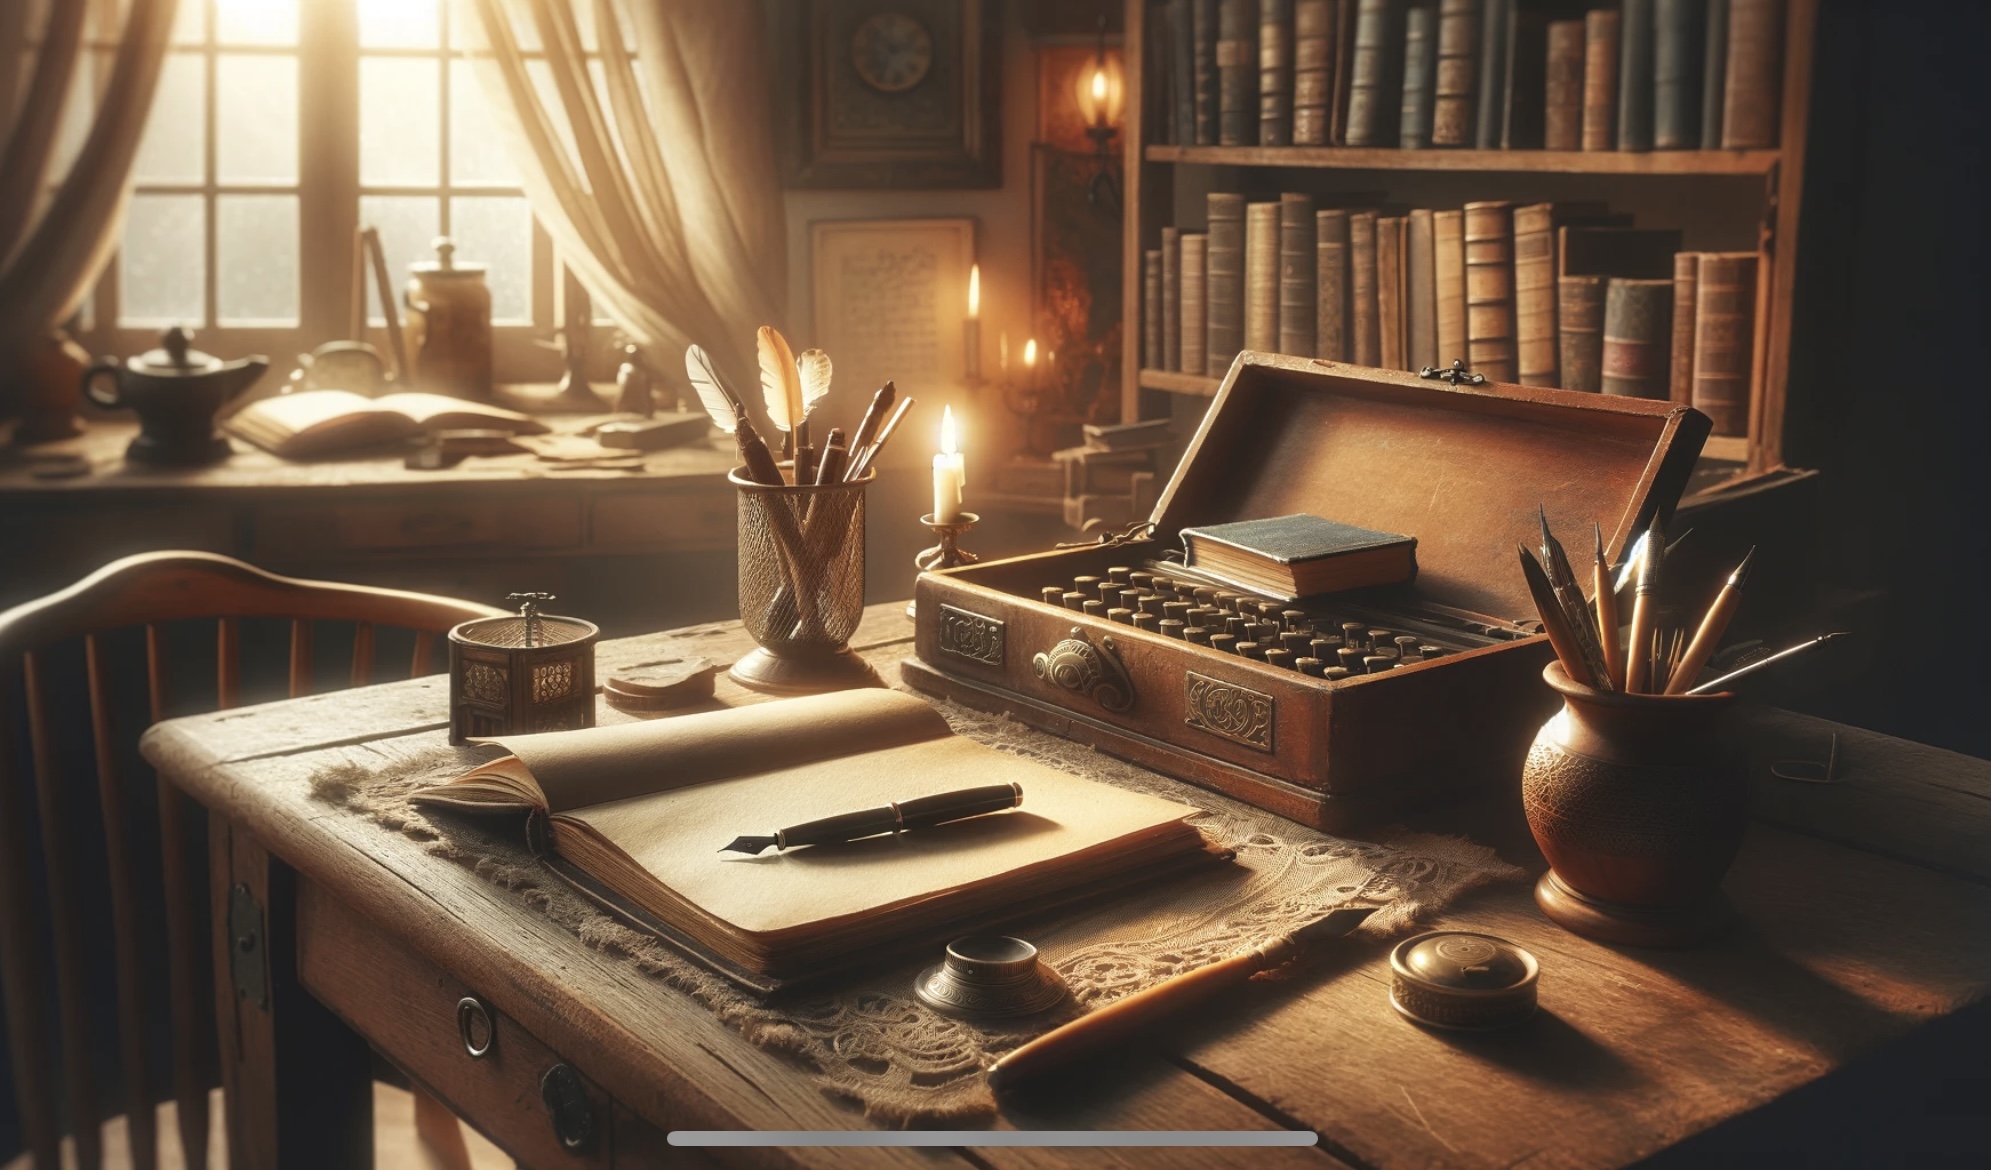 An artistic and inspirational image representing the concept of writing craft. The image features a vintage wooden desk in a cozy, softly lit room. On the desk, there's an open notebook with a fountain pen beside it, suggesting the act of writing. The background includes a bookshelf filled with various books, symbolizing a wealth of knowledge and inspiration. Soft, warm lighting creates an inviting and contemplative atmosphere, ideal for writing and creativity. The scene embodies the essence of a writer's workspace, full of character and inspiration, perfect for a blog post about improving writing craft.